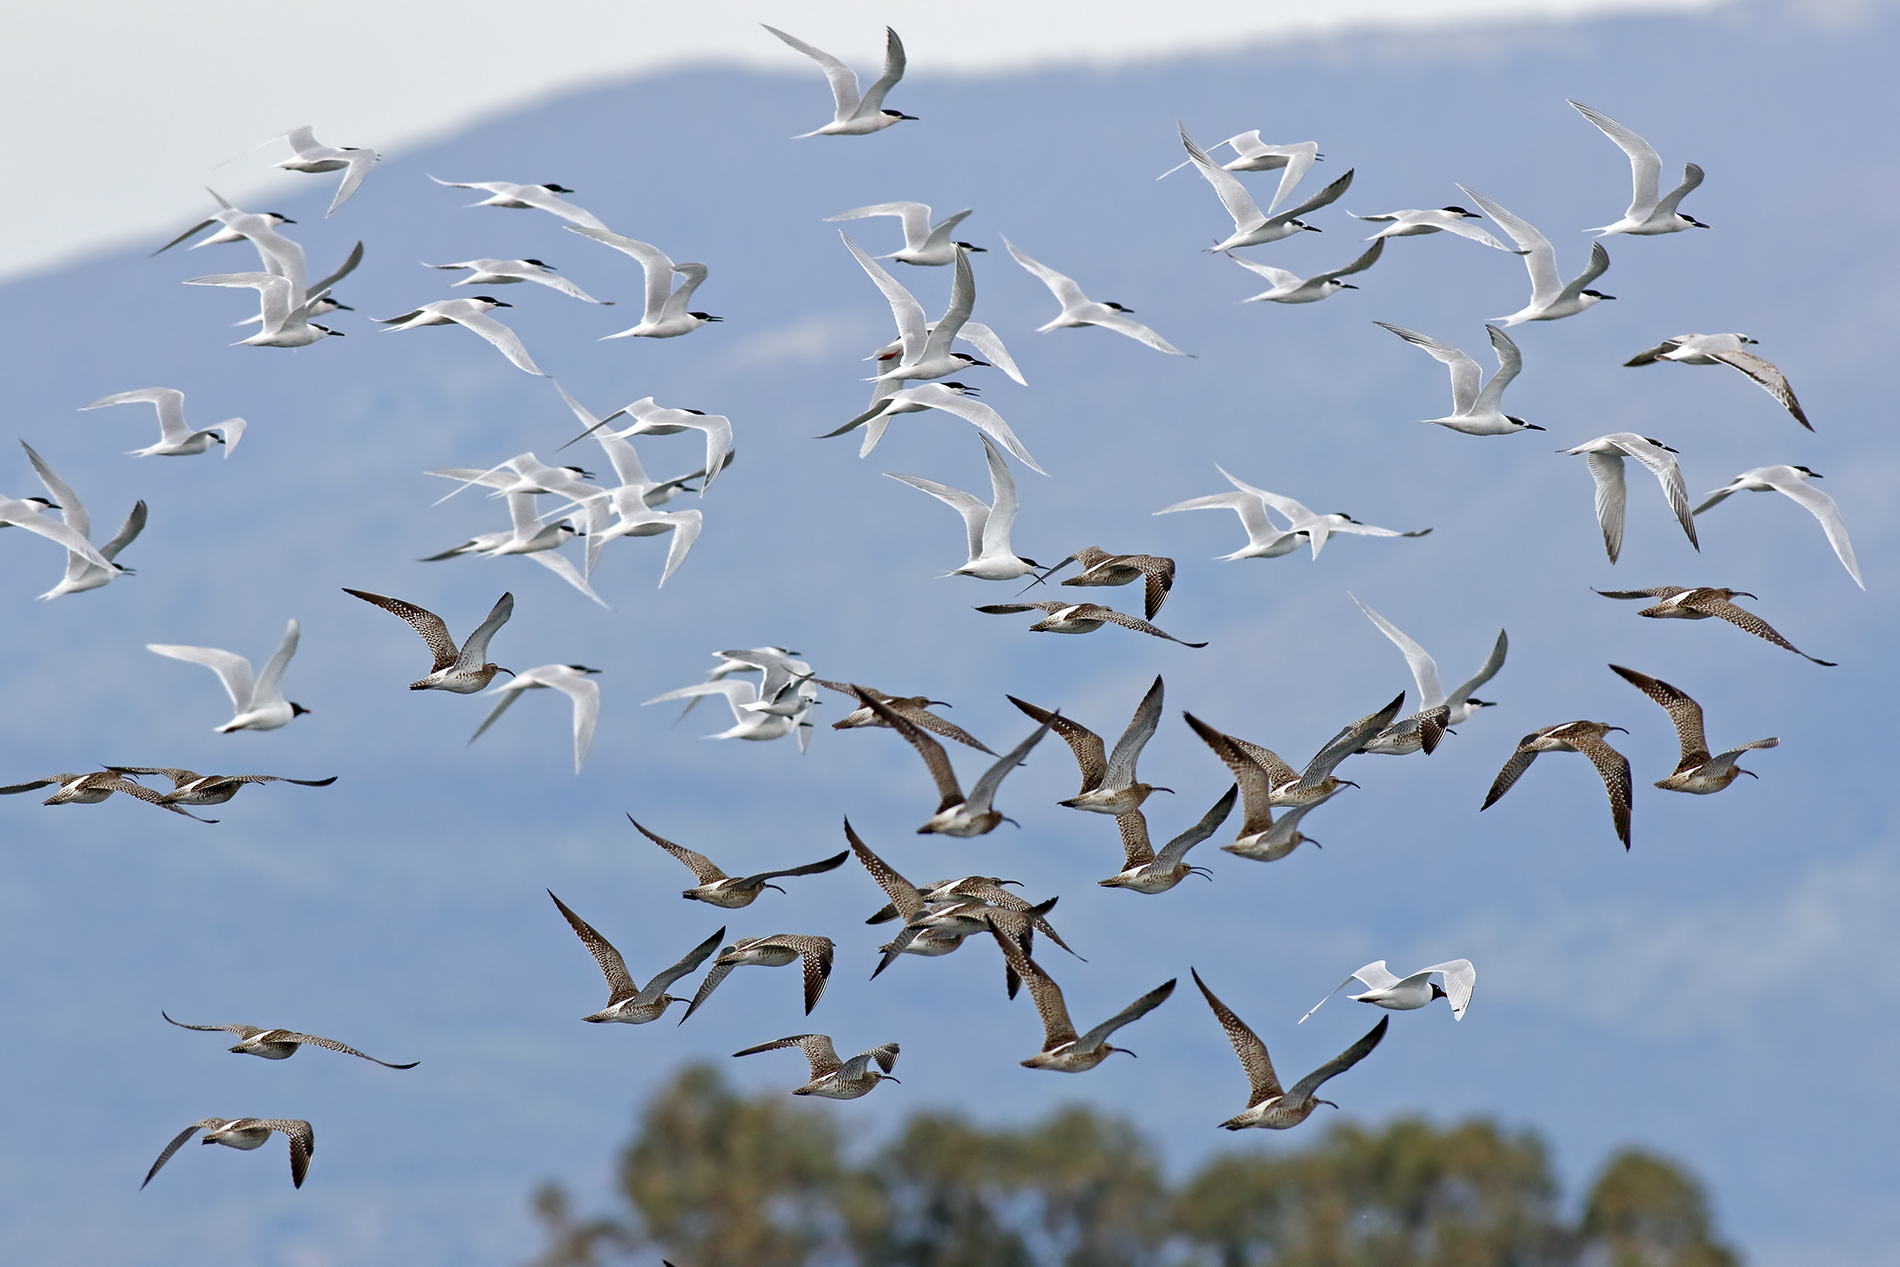 The migration of the sandwich tern and small curlews...